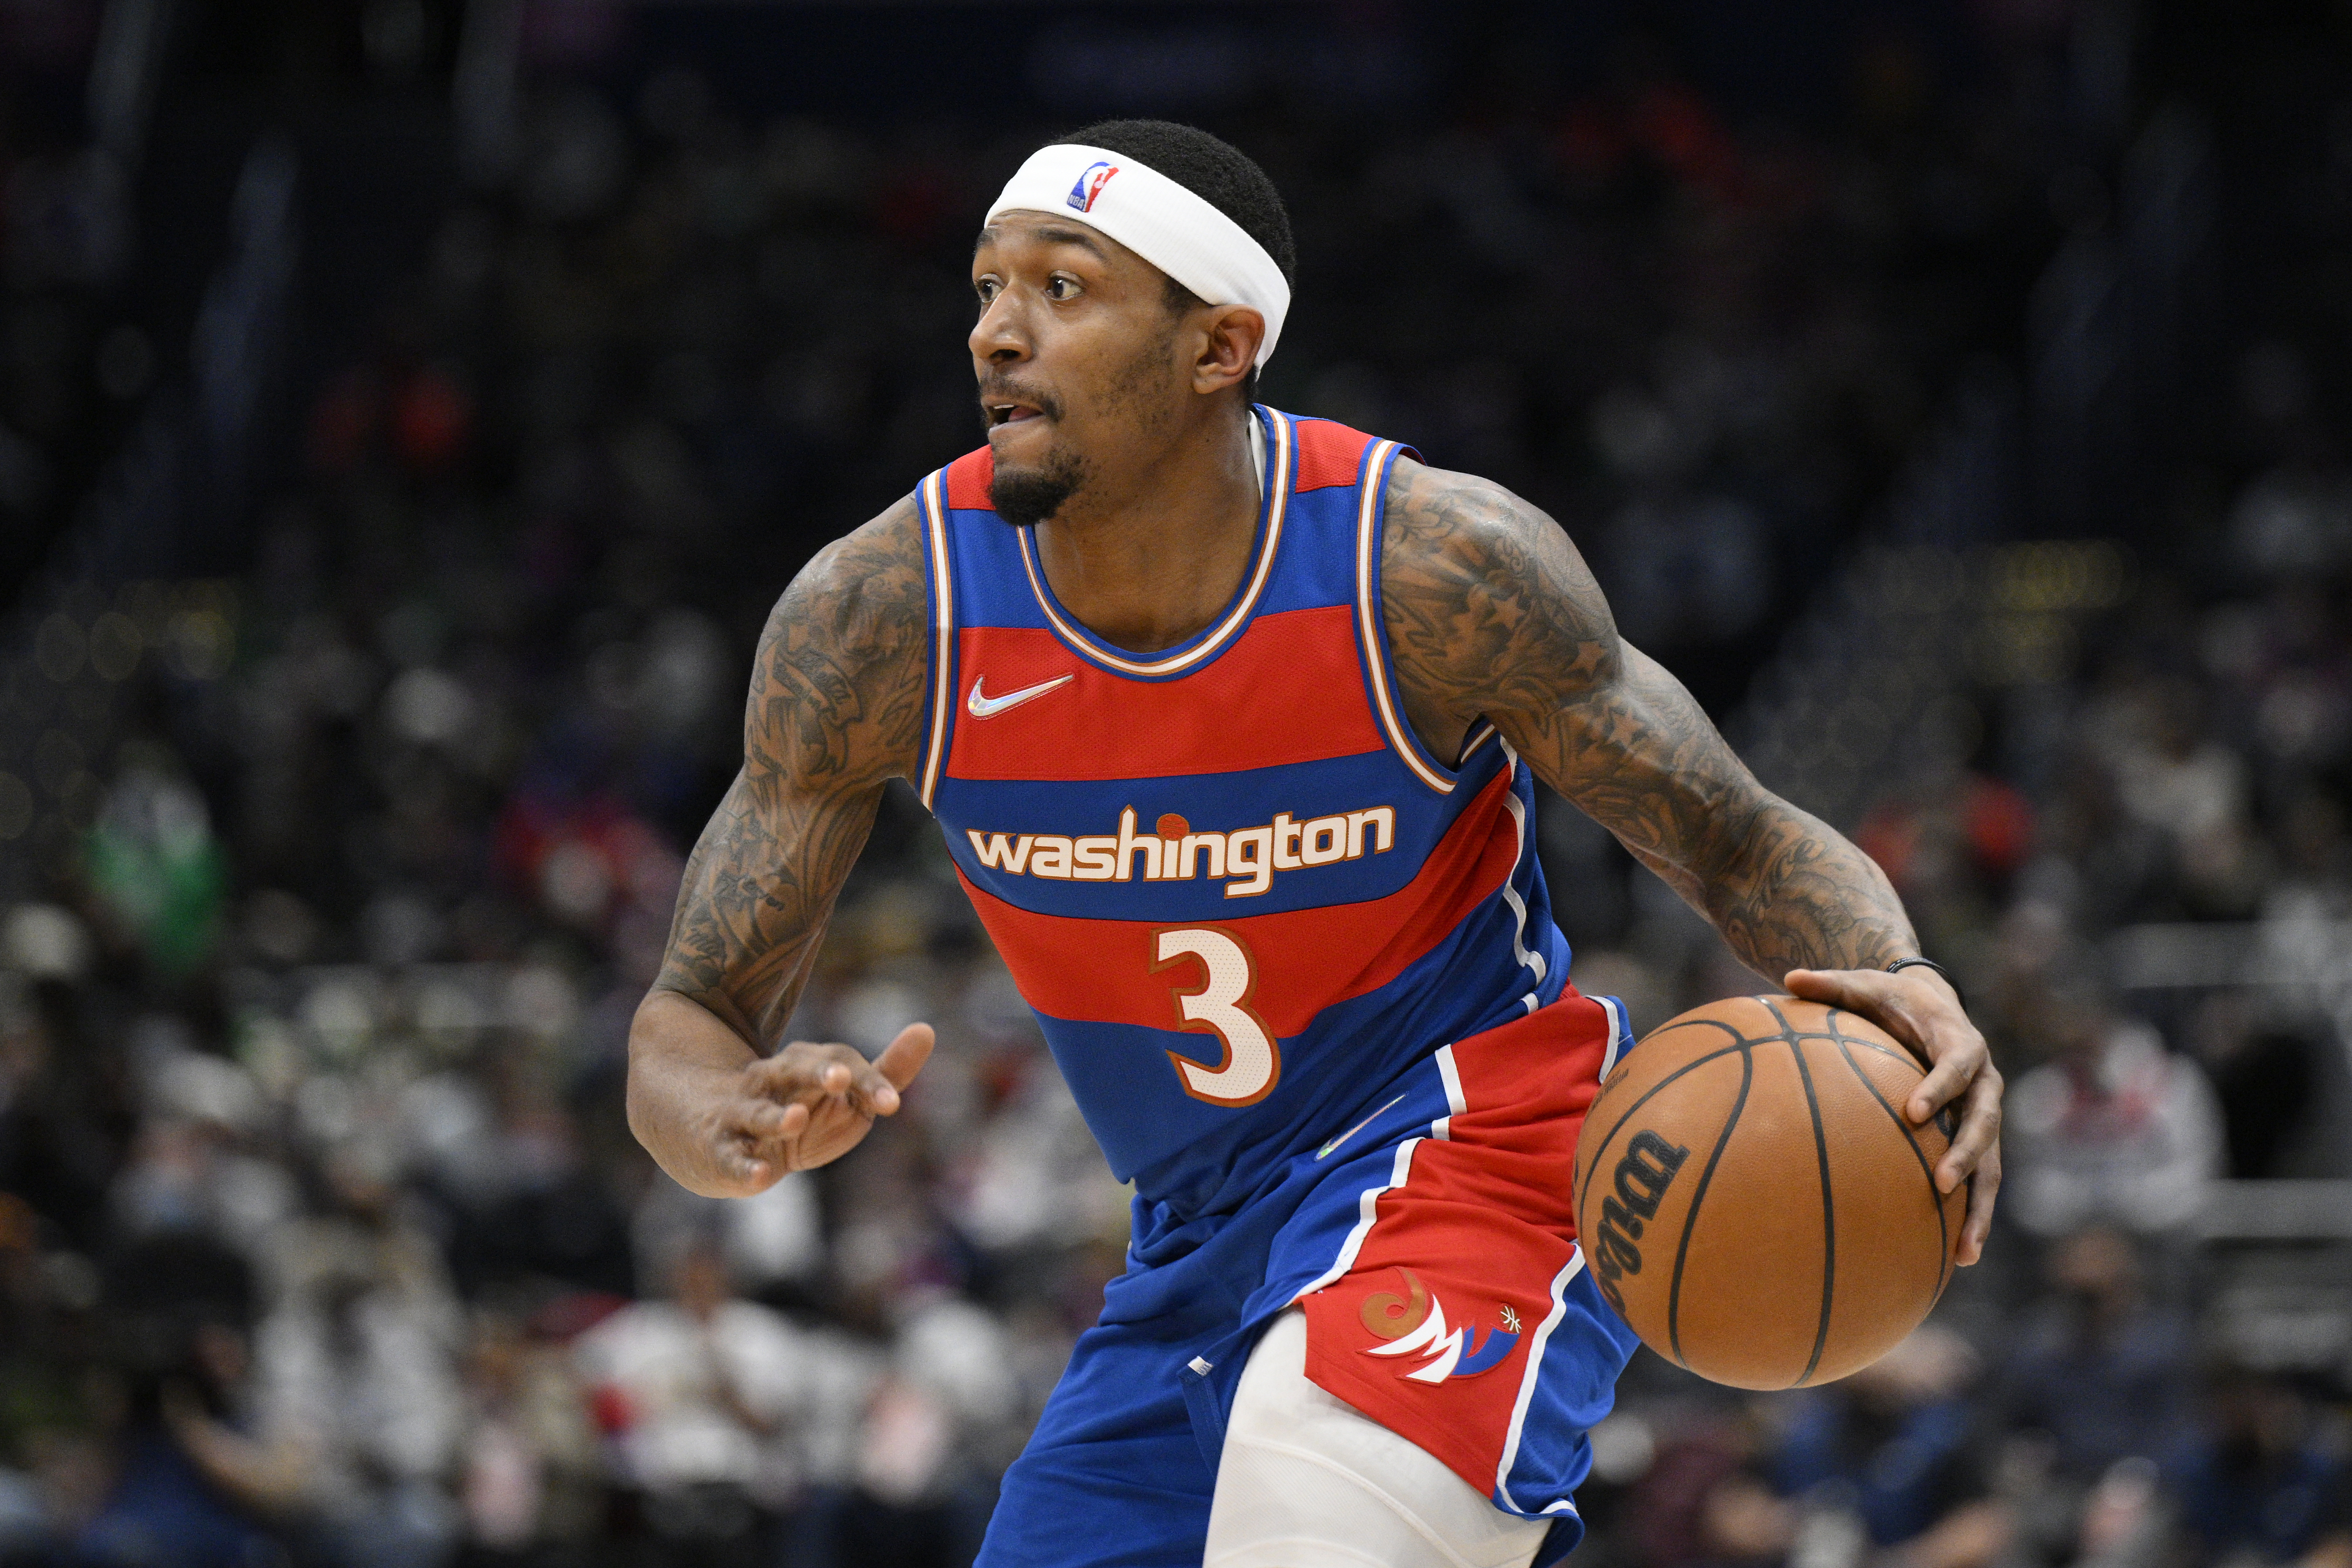 The only way the Lakers could actually trade for Bradley Beal